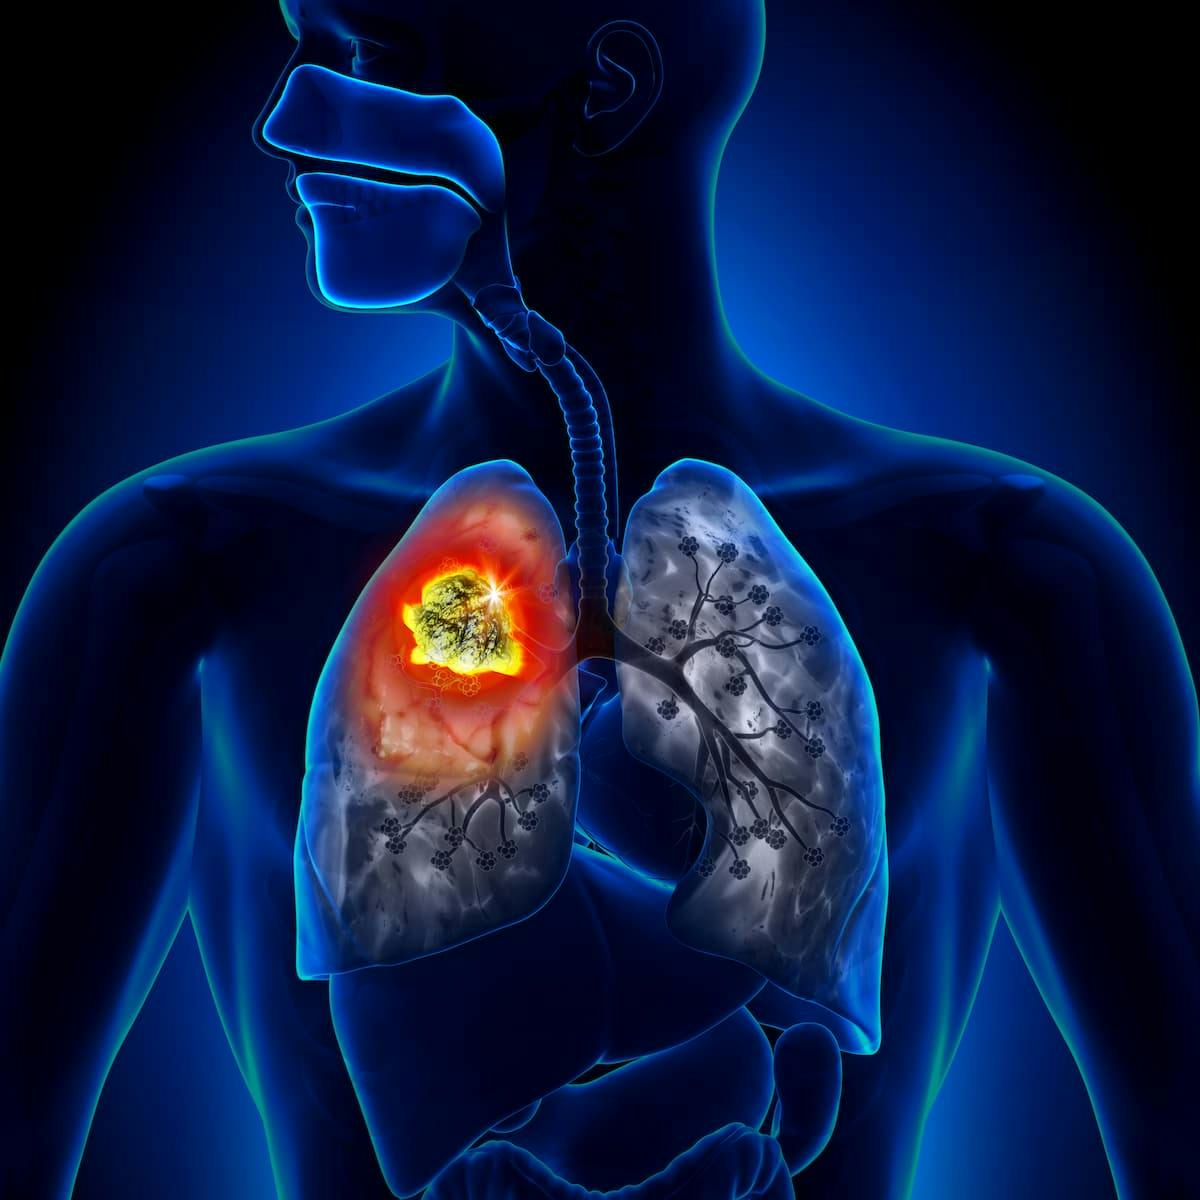 Patients with non–small cell lung cancer who had mild/moderate immune-related adverse effects appear to have improved overall survival compared with those without following atezolizumab-based therapy.